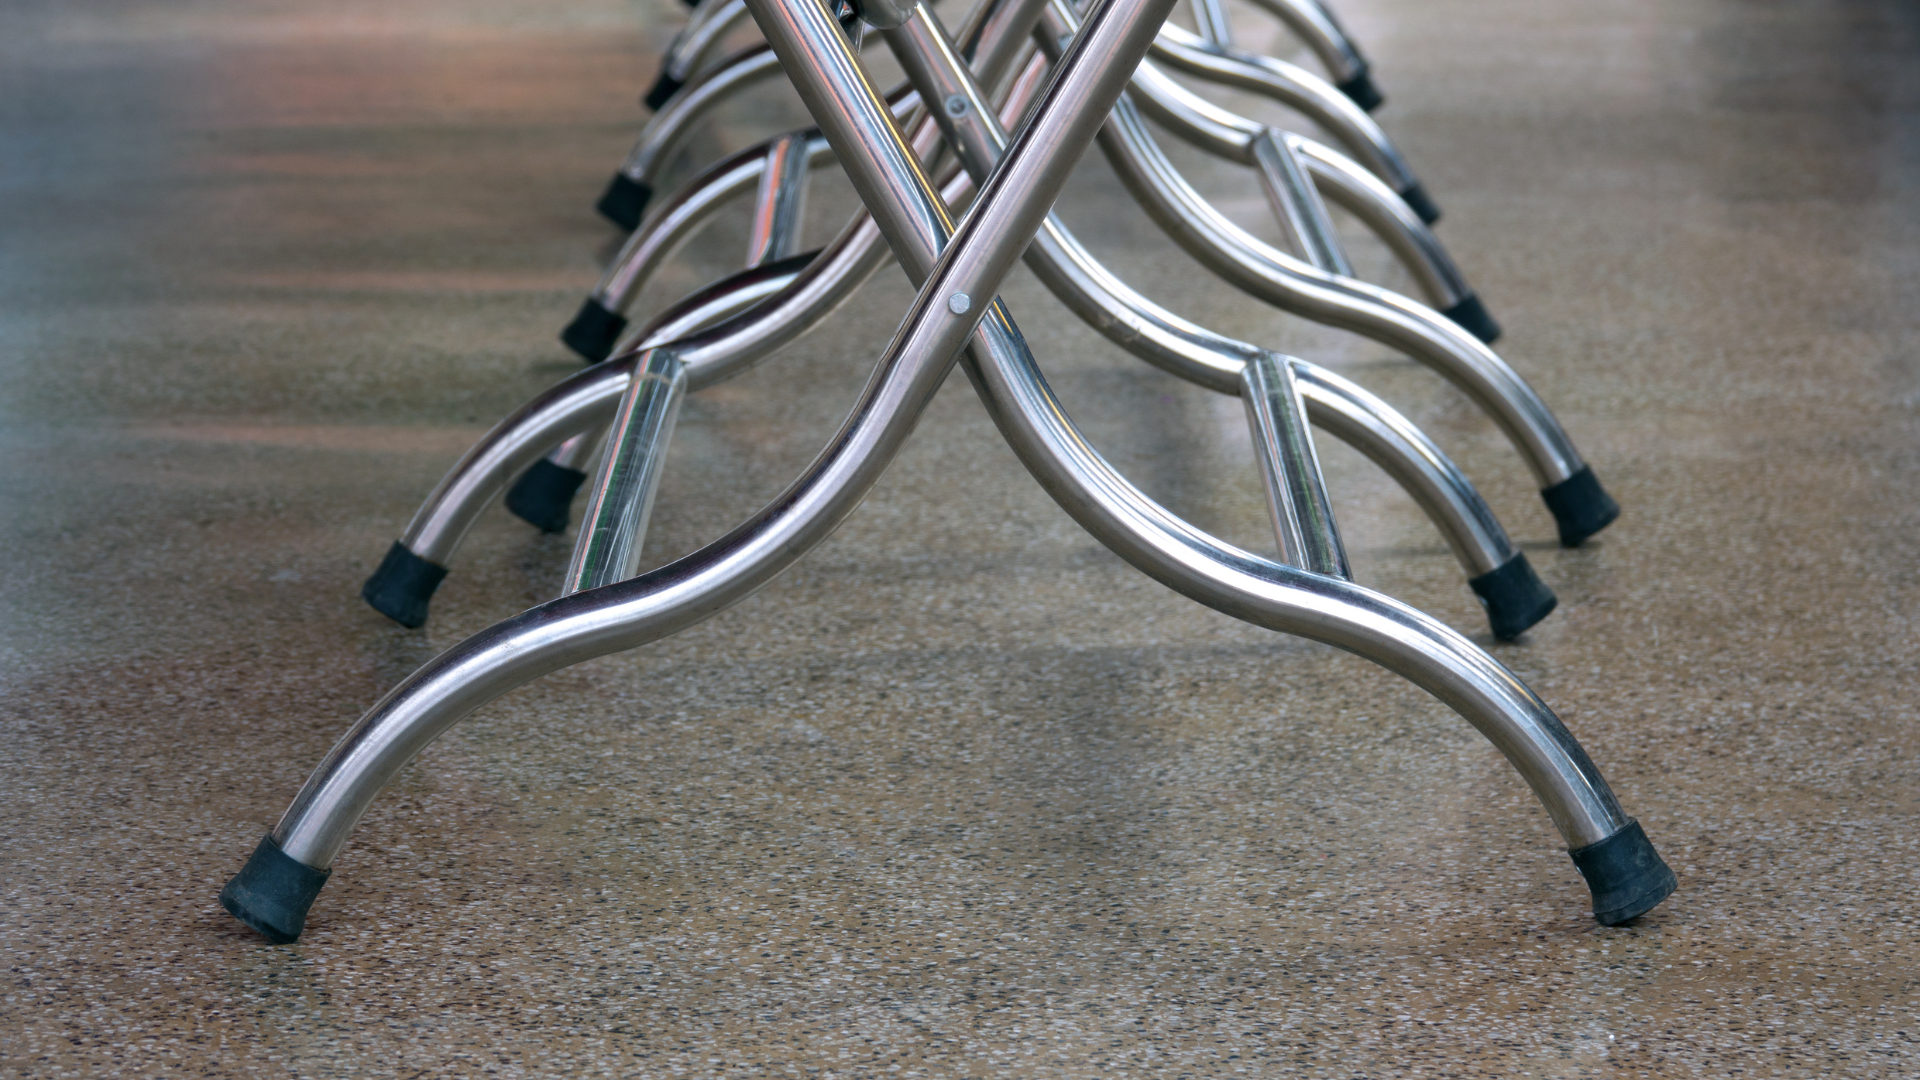 Steel table legs are also resistant to rust and scratches, as well as to high temperatures and impacts.